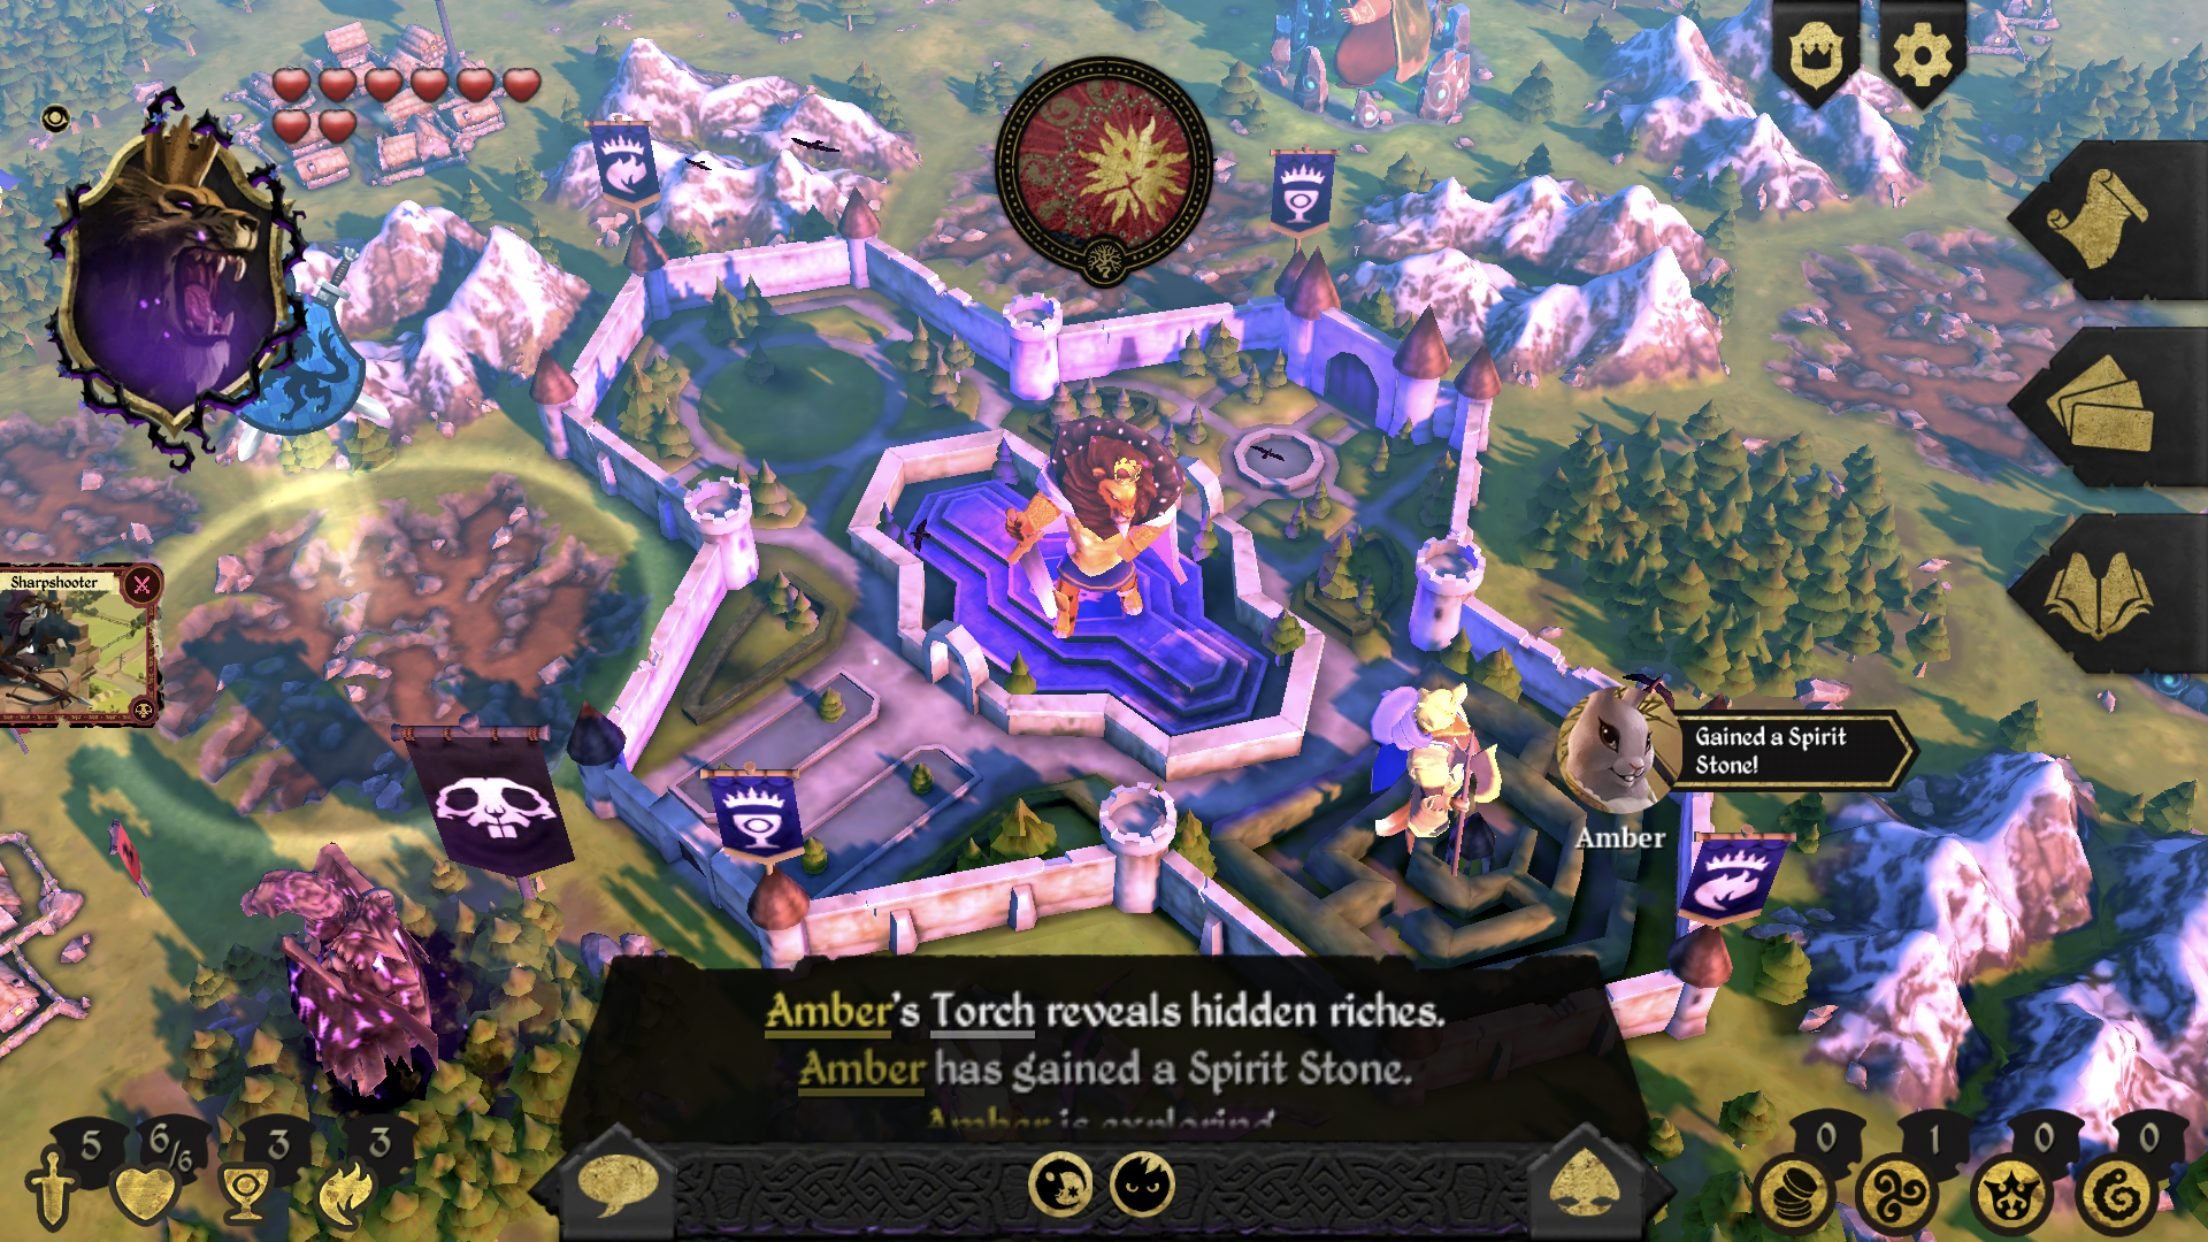 download armello for free